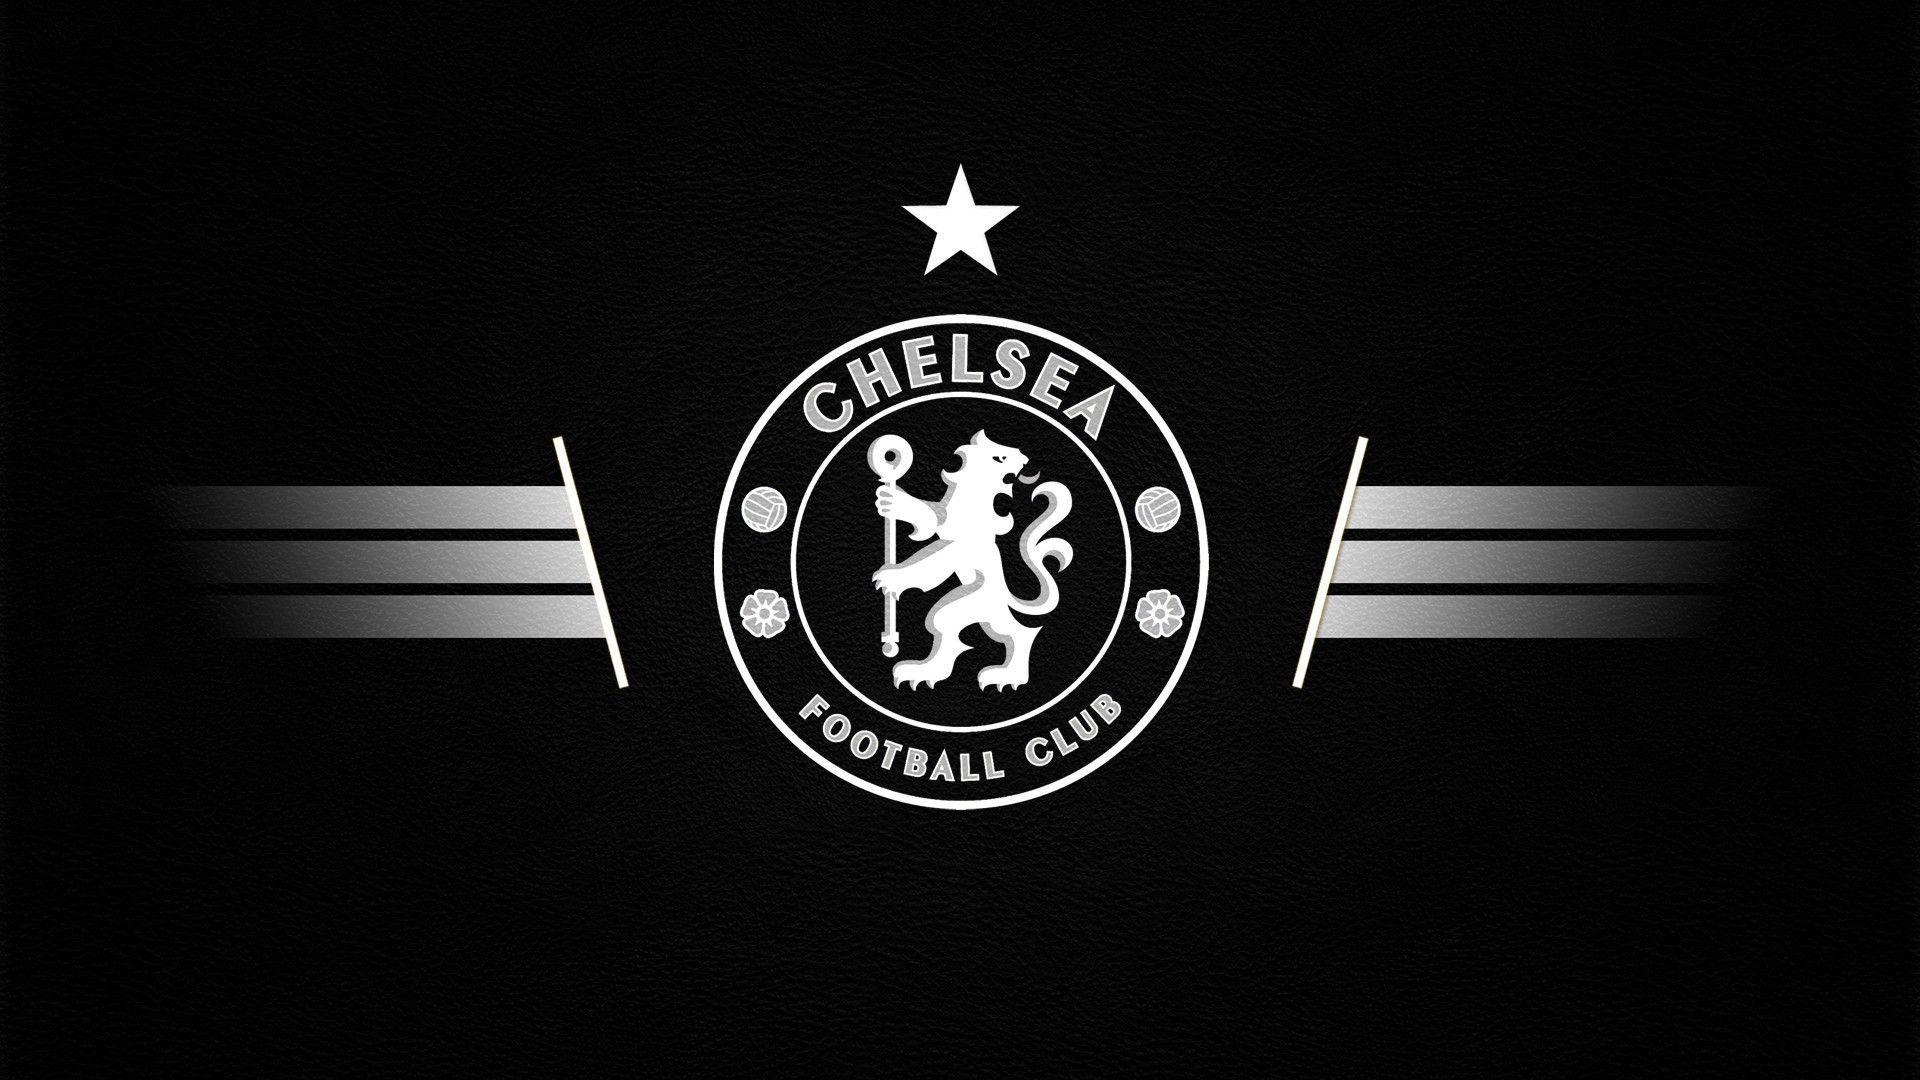 Beloved club of England Chelsea wallpaper and image